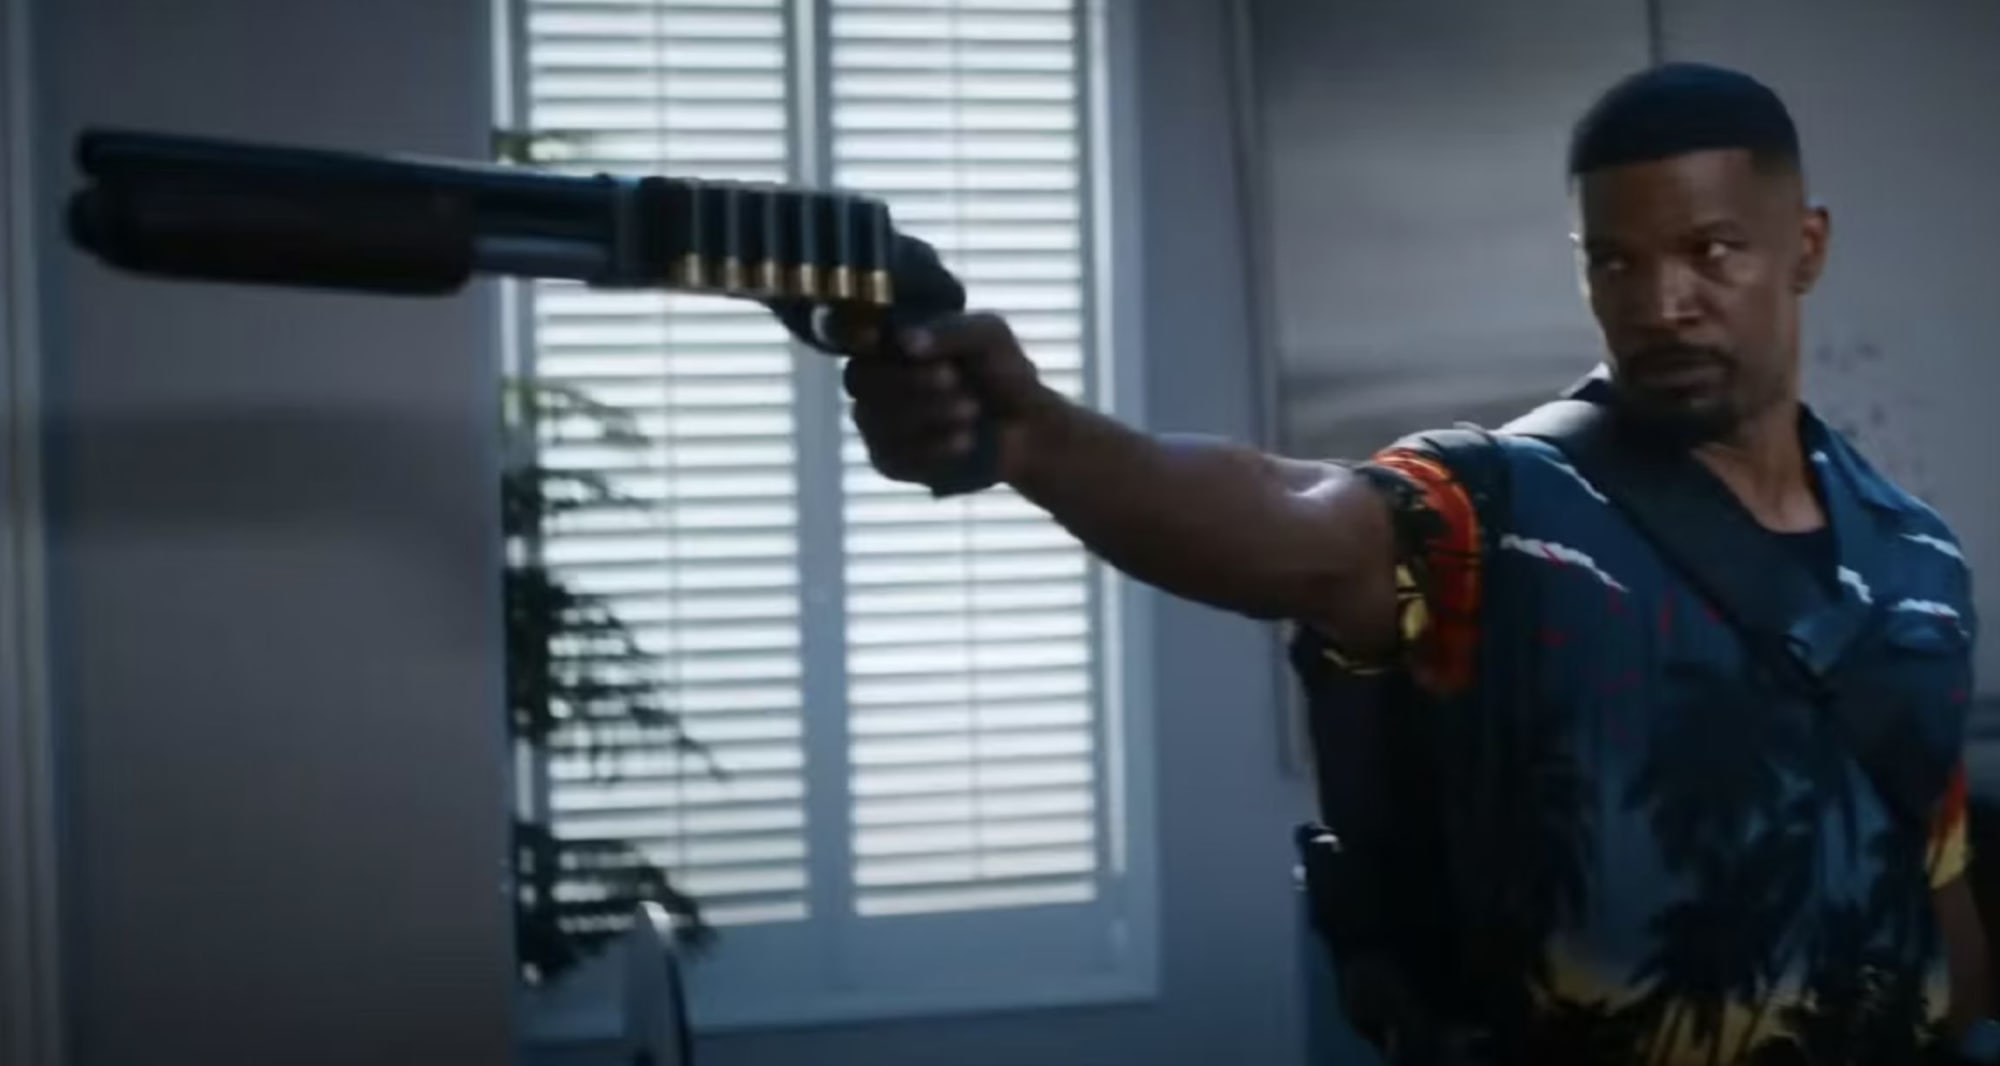 Trailer for Day Shift, where Jamie Foxx and Snoop Dogg hunt vampires